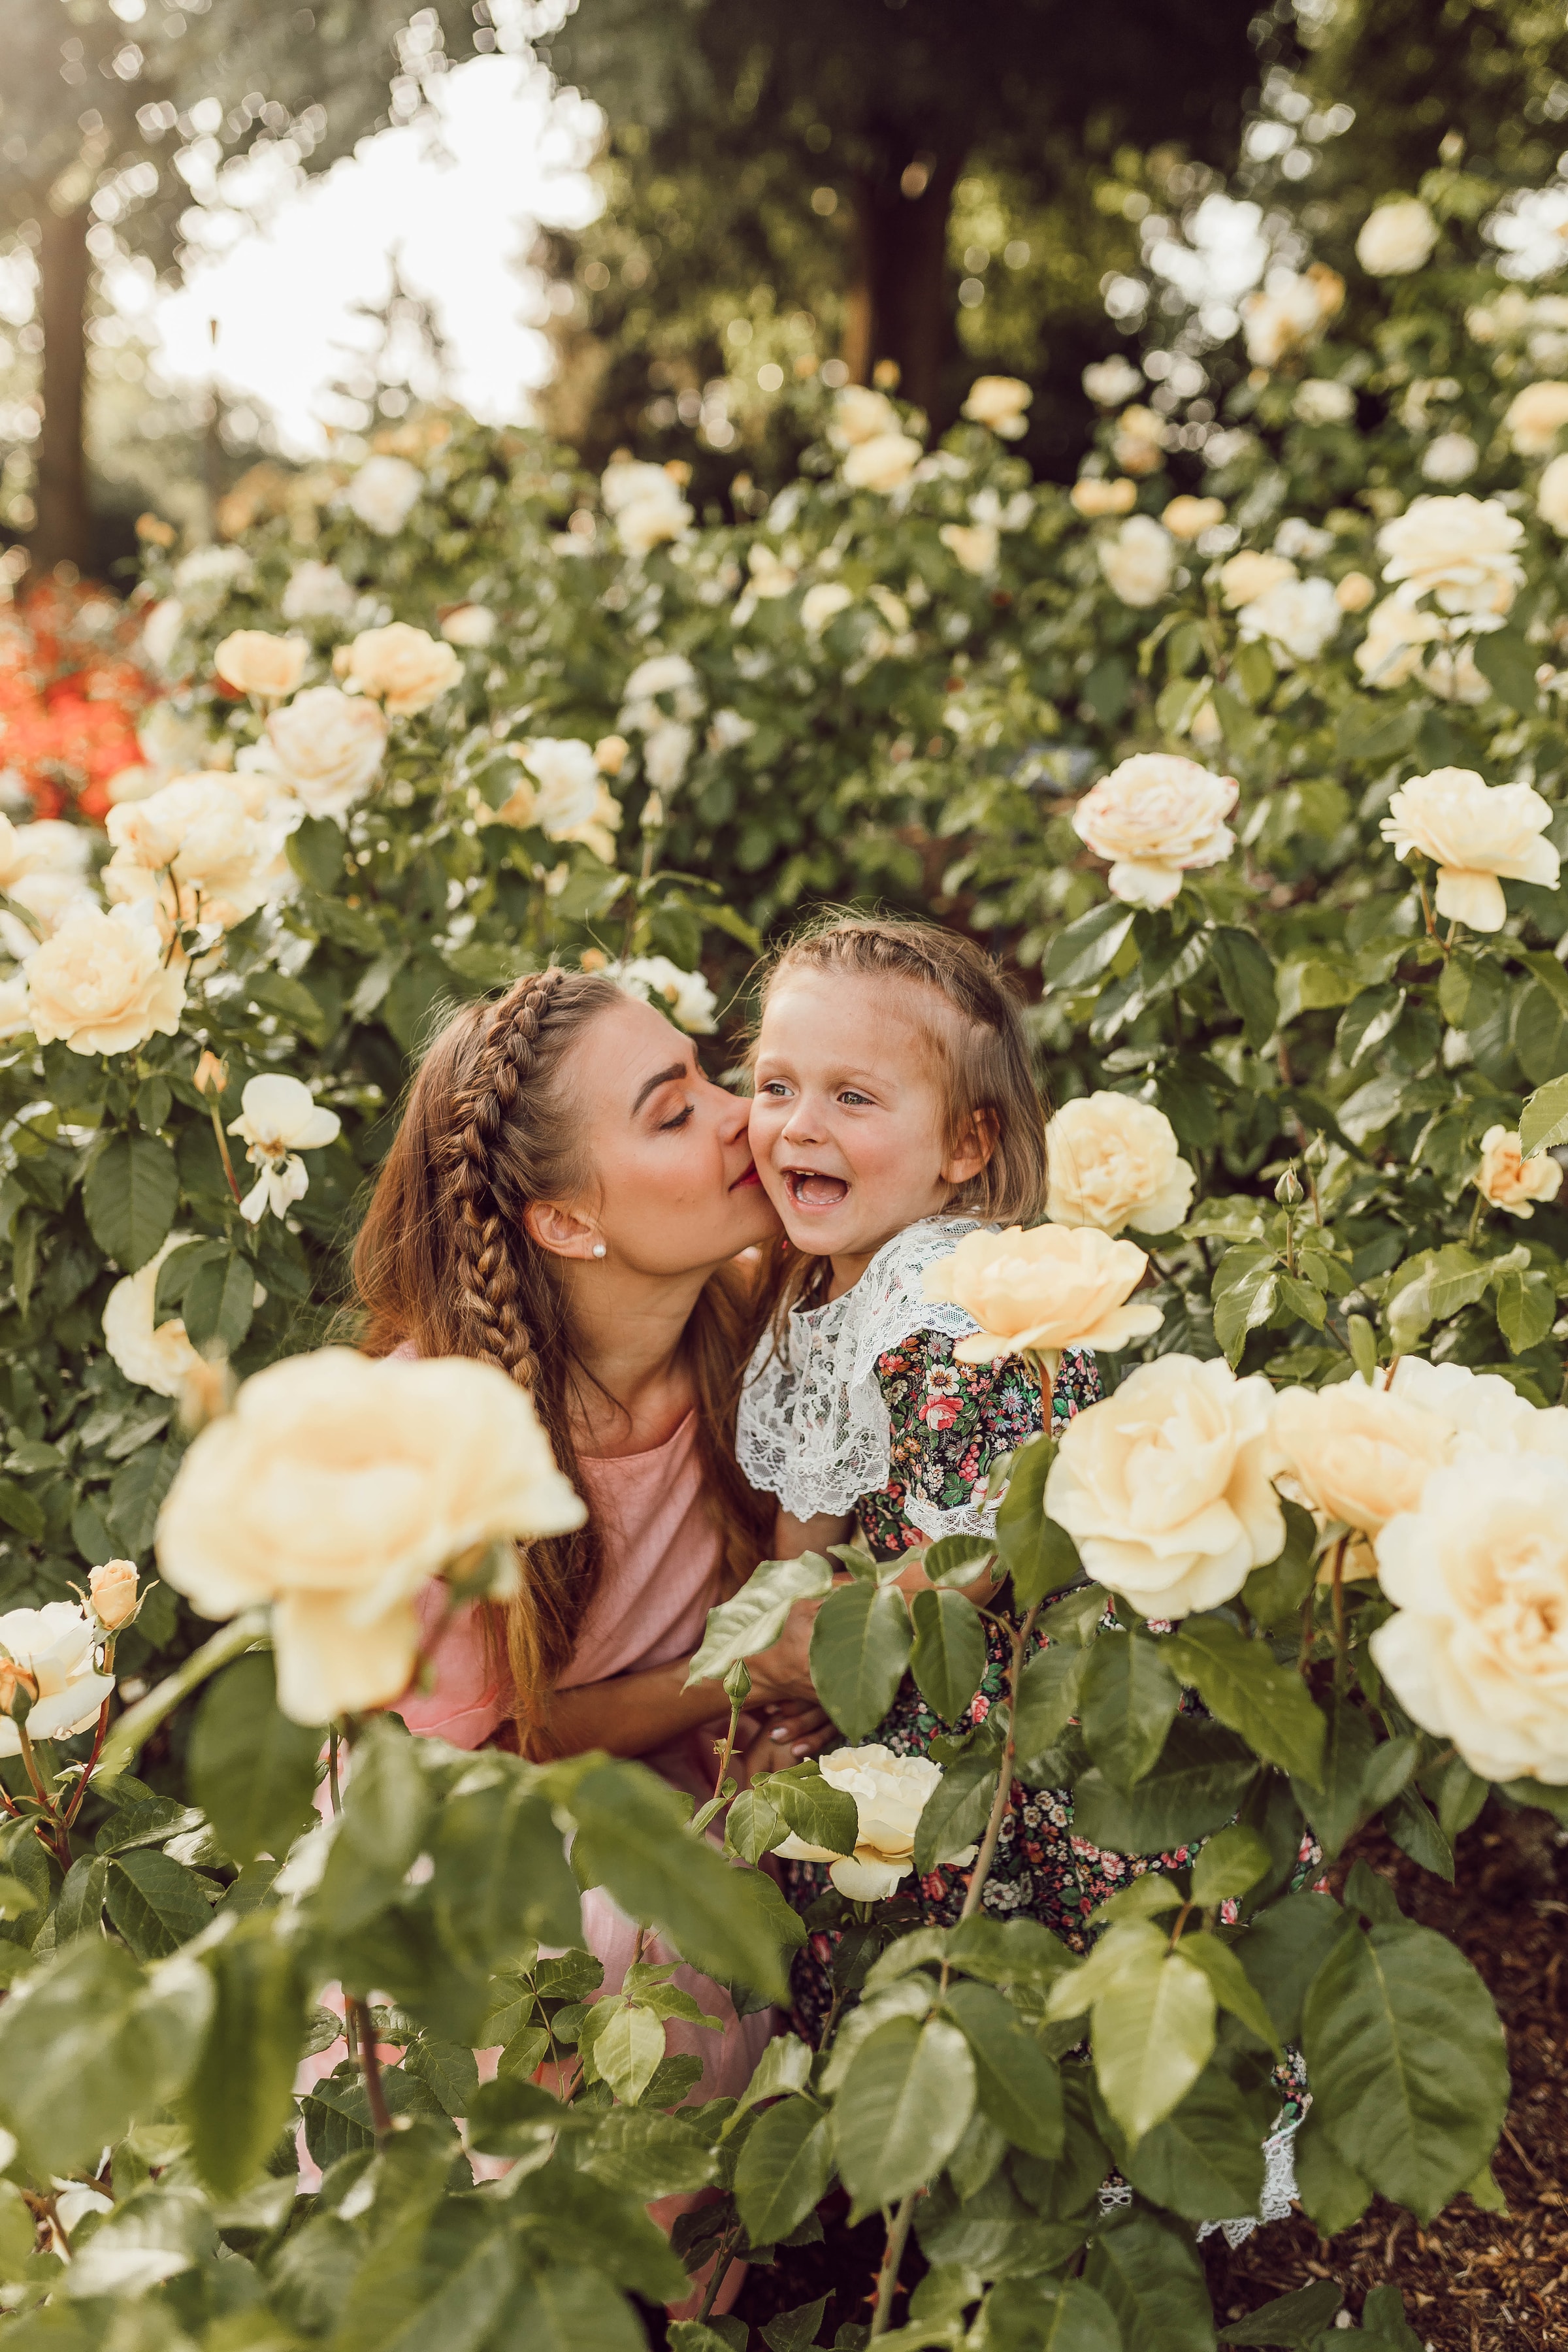 A woman kissing her little daughter in a flower field | Source: Unsplash